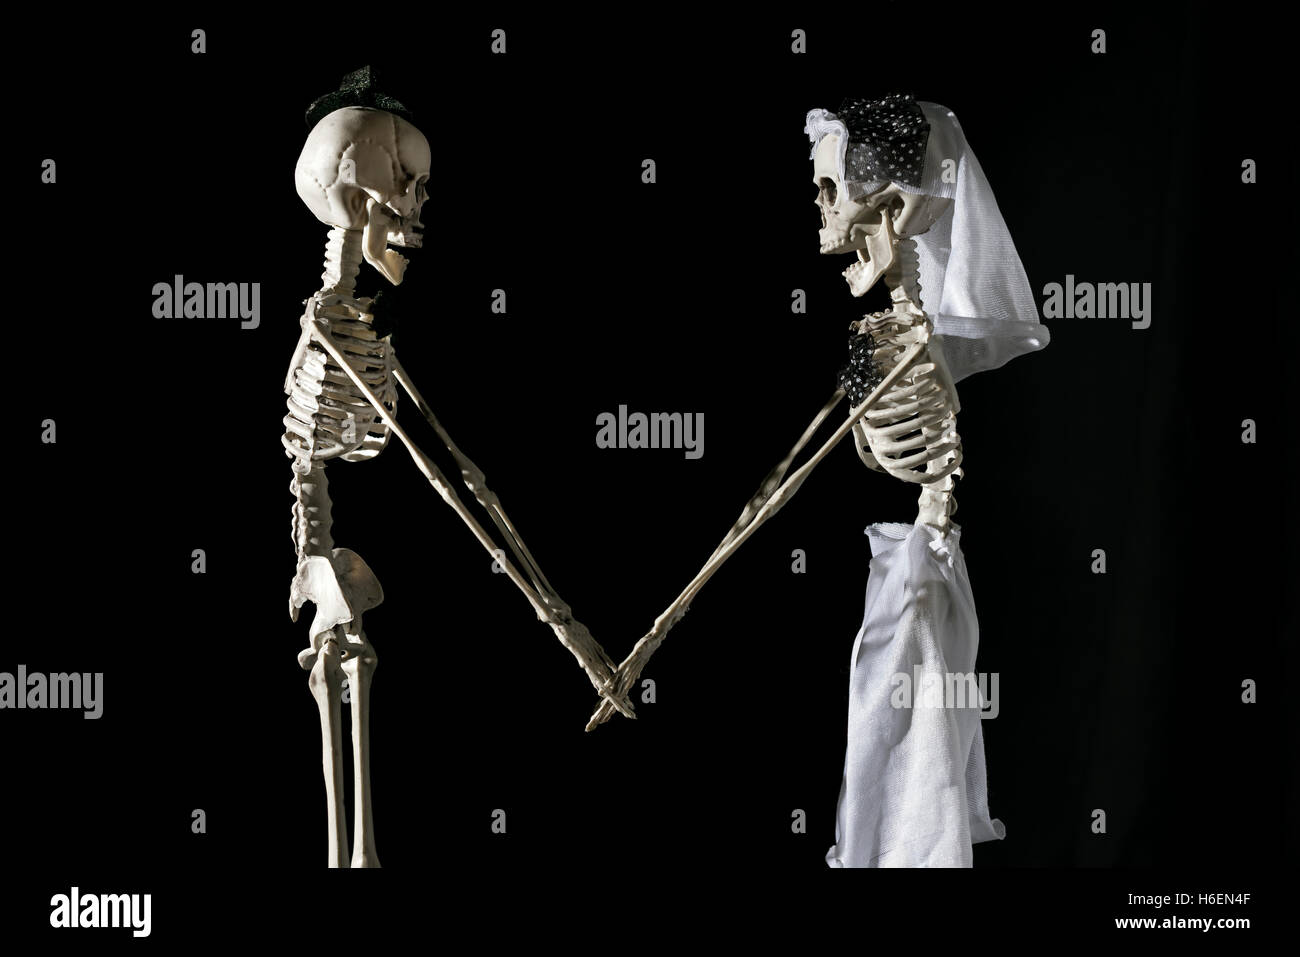 Skeleton bride and groom on a black background. Stock Photo